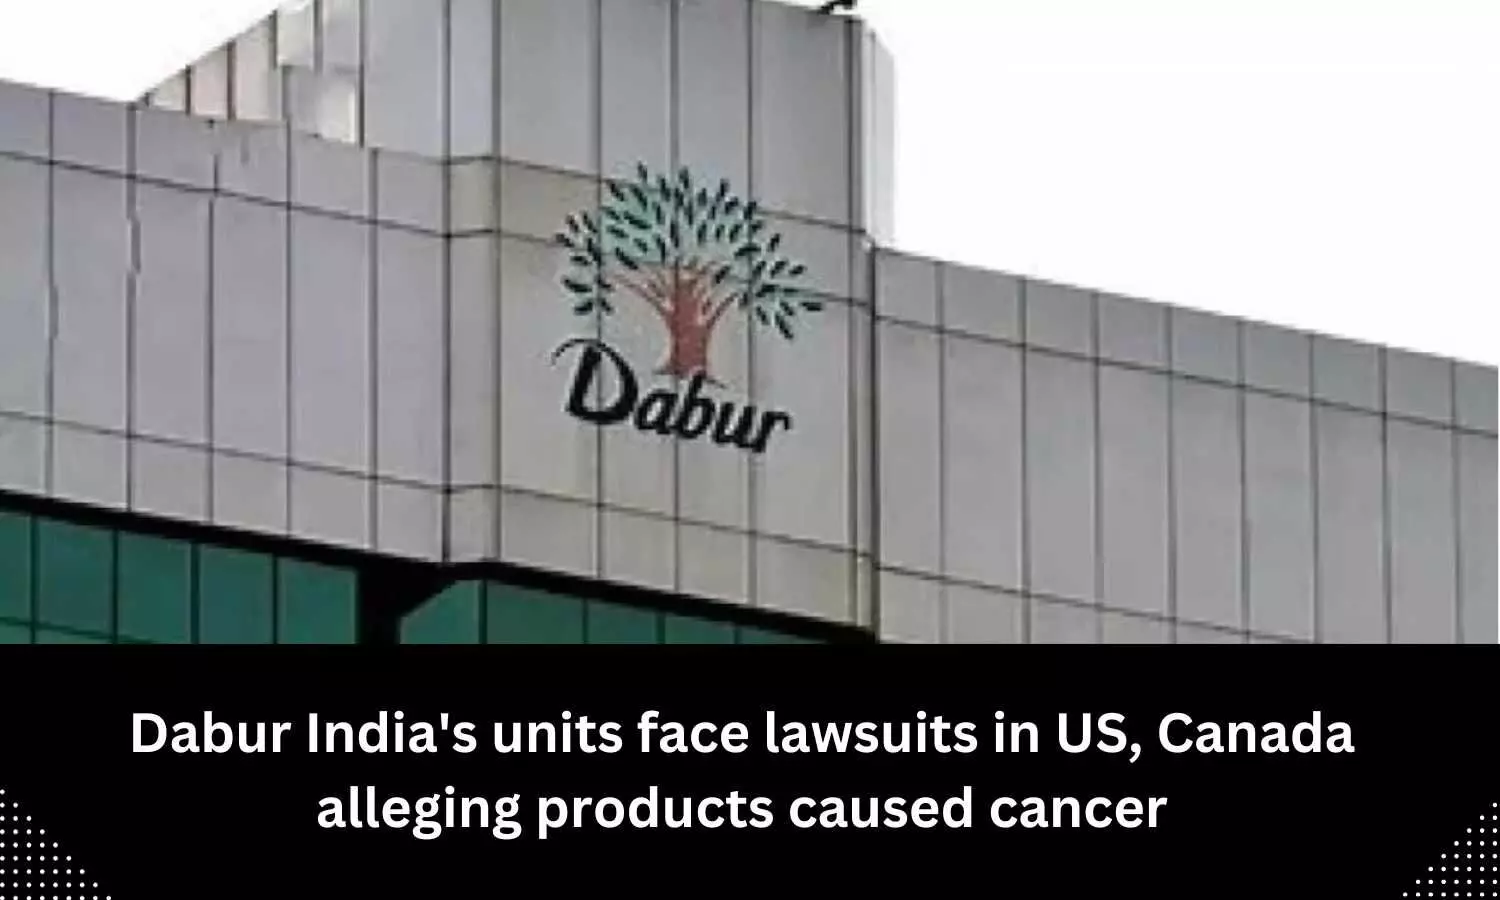 Dabur India units face lawsuits in US, Canada alleging products caused cancer